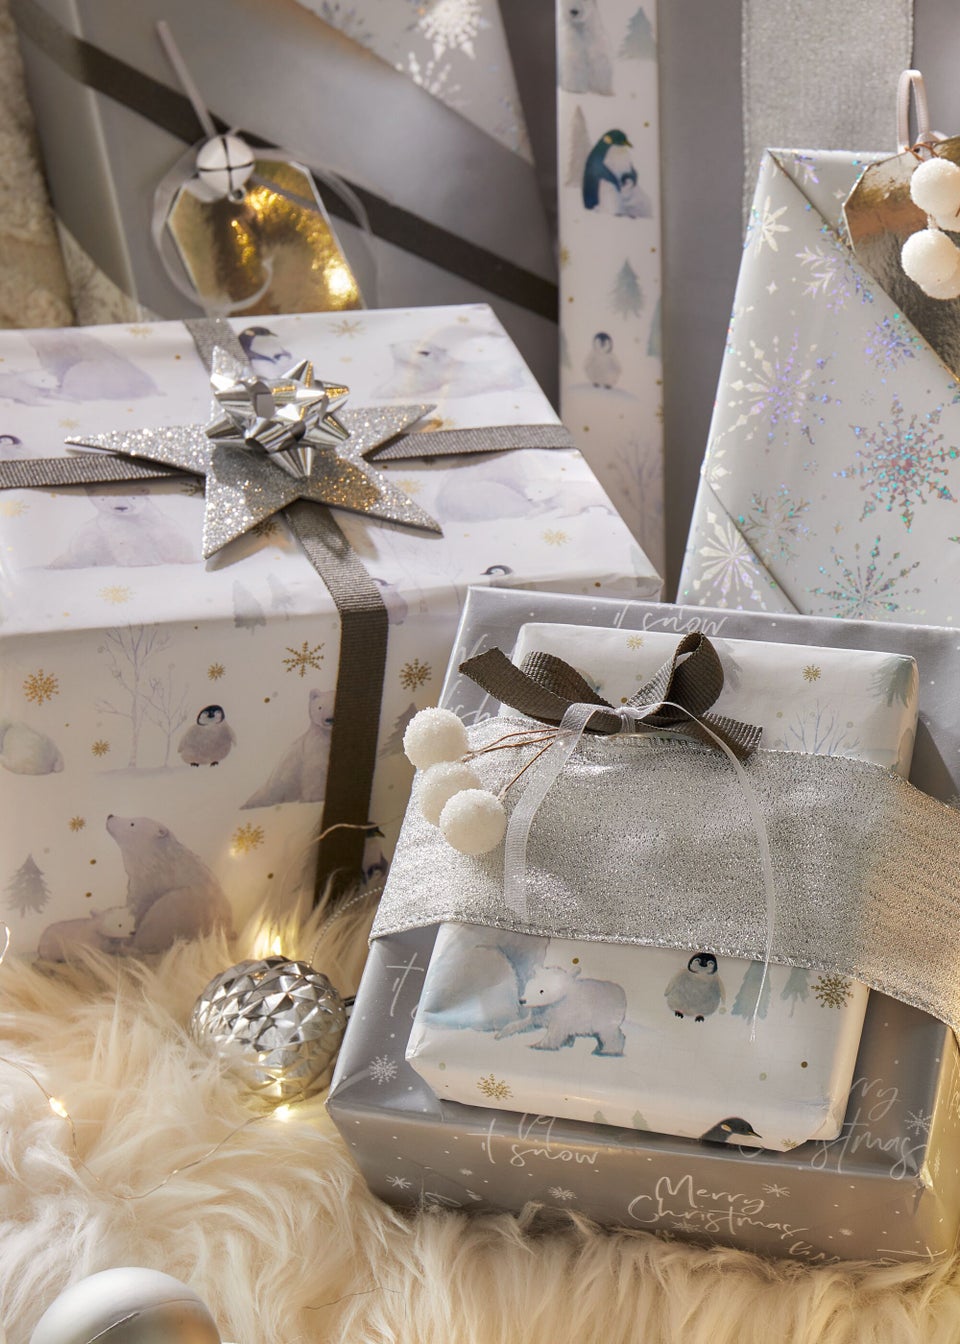 Over 50% Off Hallmark Wrapping Paper Set on , Includes Paper, Bows,  Ribbons, & Tags